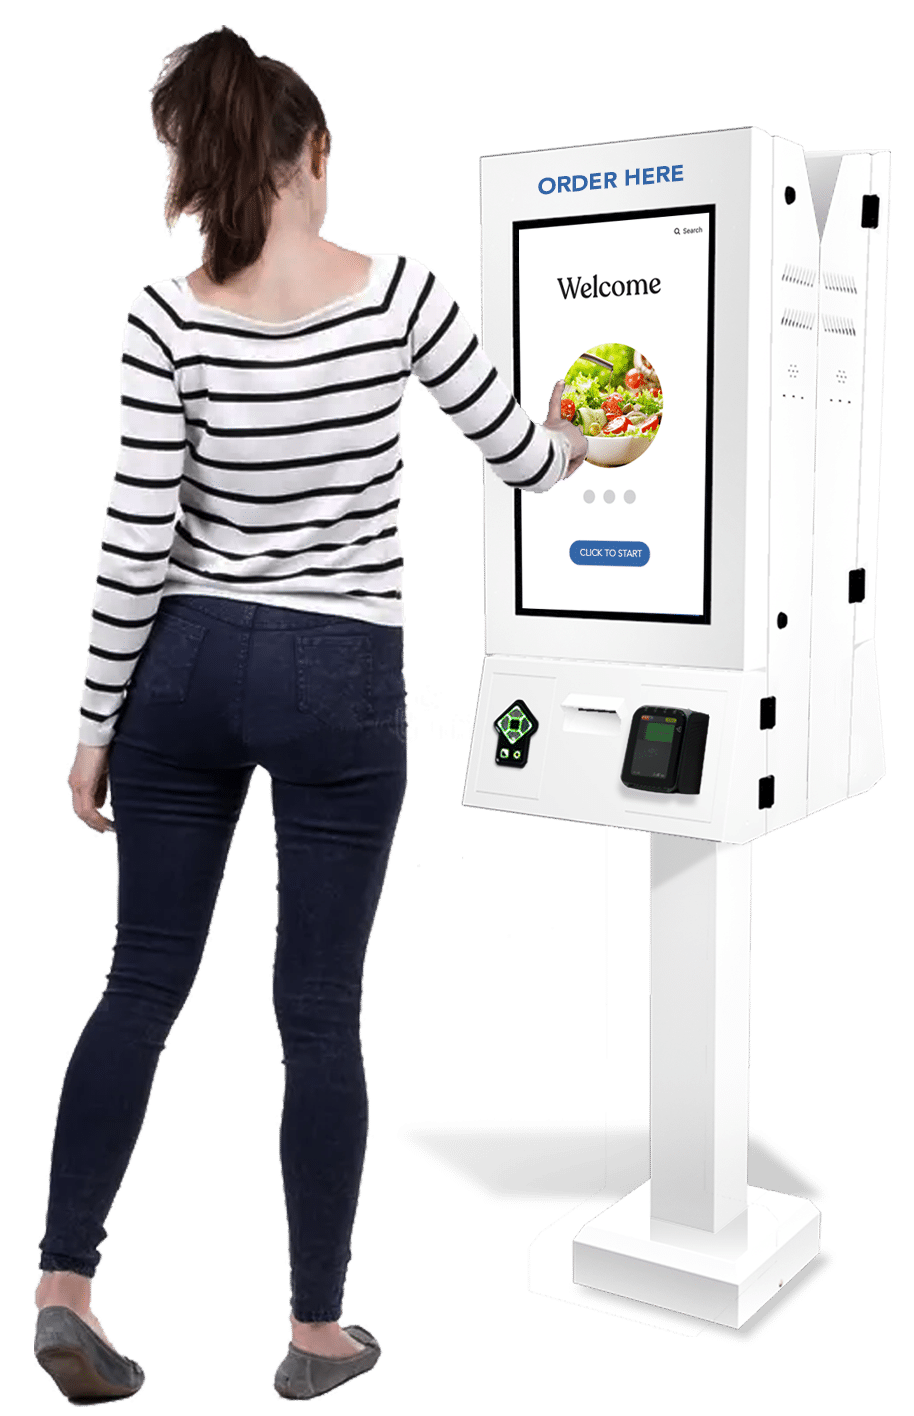 Person ordering food from a self-service kiosk